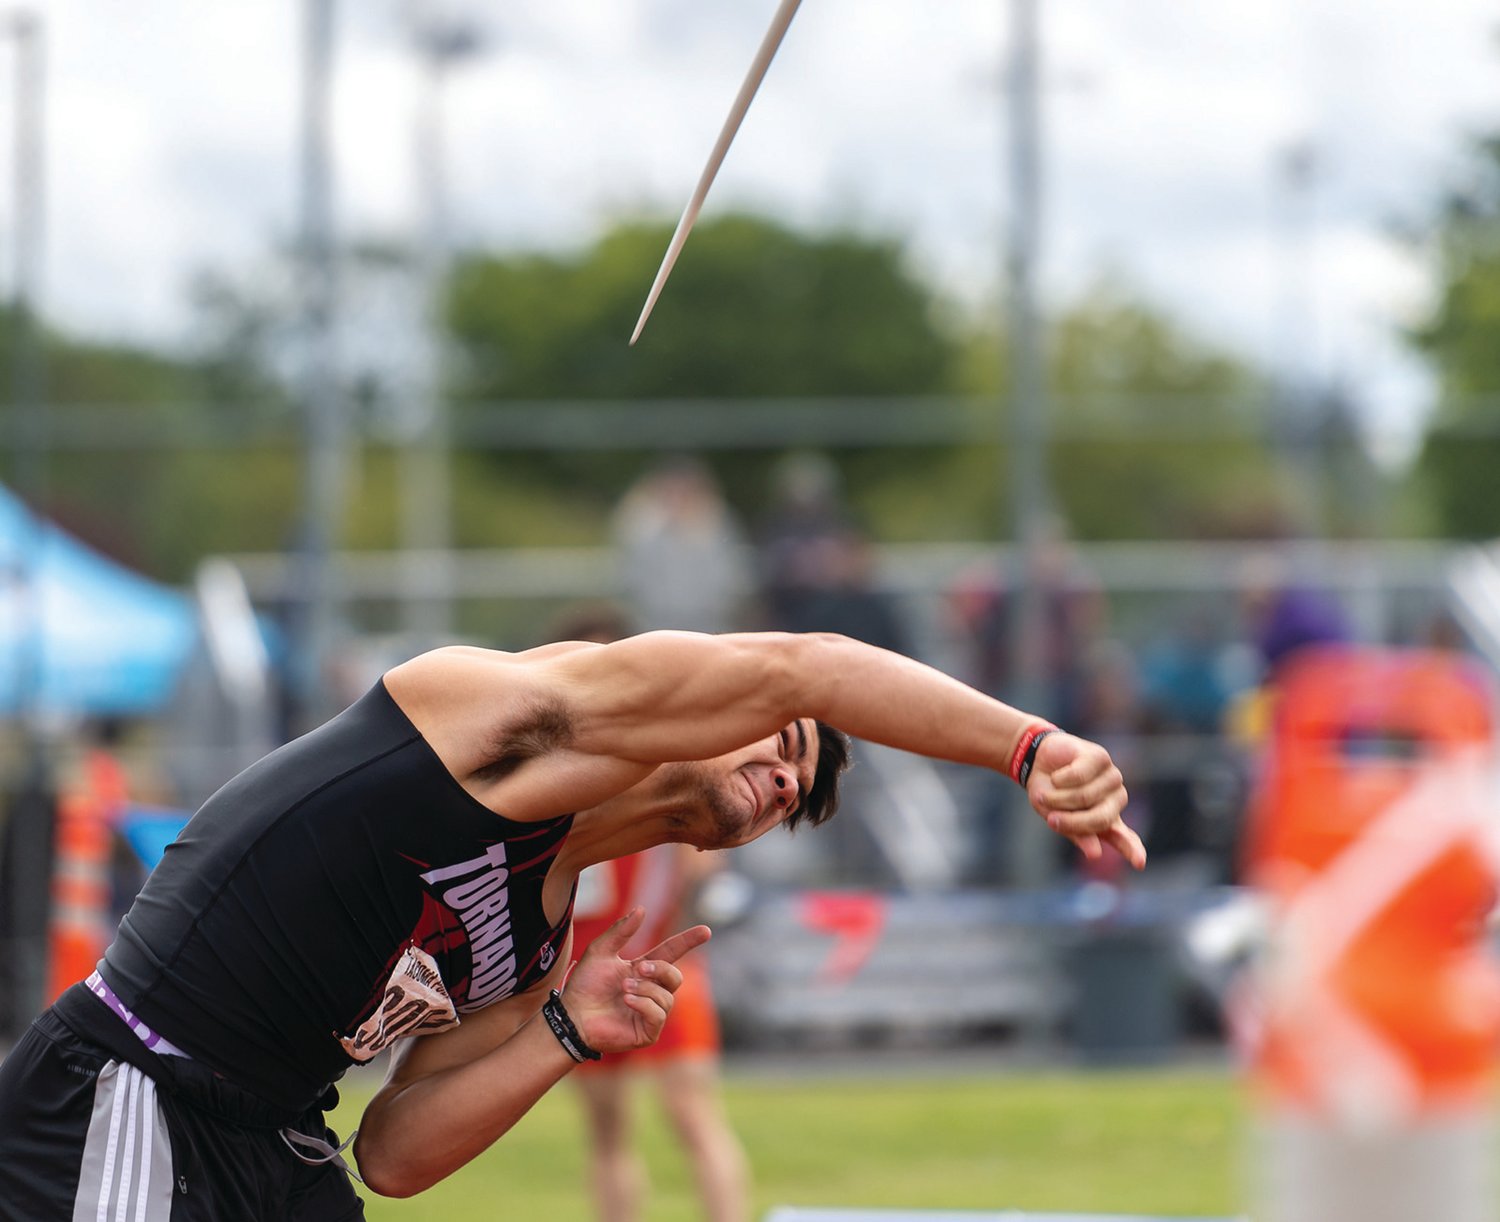 Yelm's Brayden Plant launches an attempt in the 3A Boys Javelin at the 4A/3A/2A State Track and Field Championships on Friday, May 27, 2022, at Mount Tahoma High School in Tacoma. (Joshua Hart/For The Chronicle)